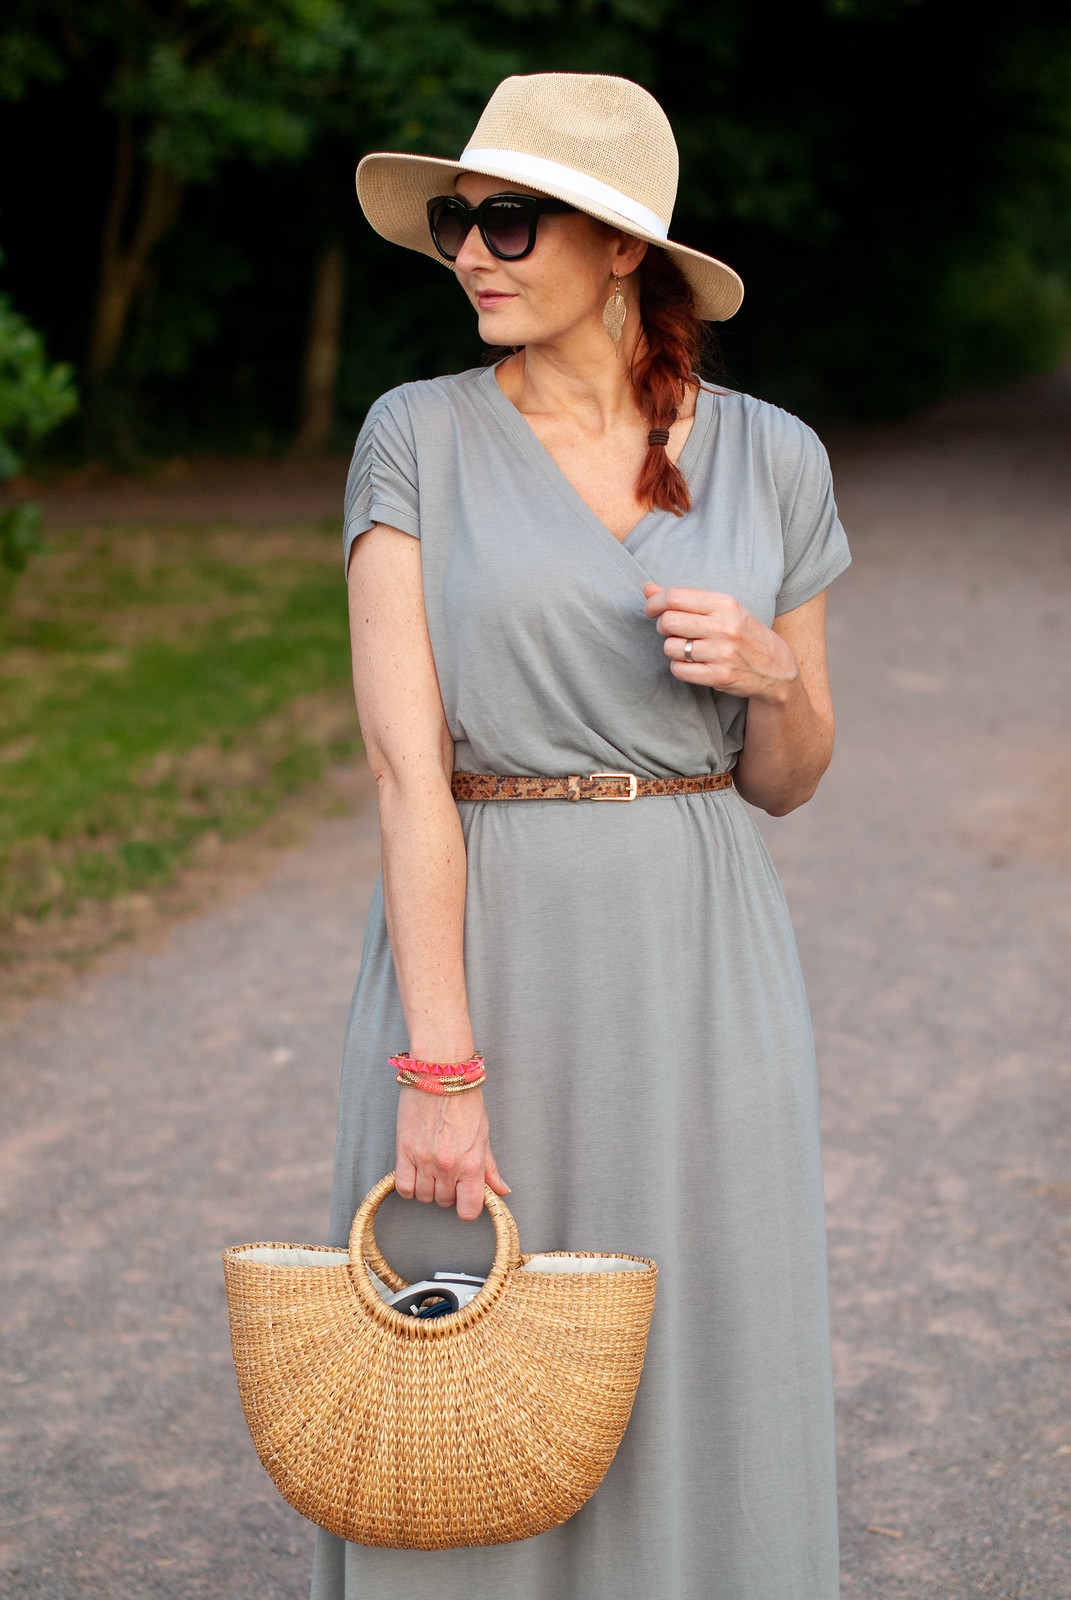 How to Keep Cool in the Summer and Still Cover Up \ grey Hot Squash maxi dress with CoolFresh fabric \ floppy straw hat \ straw basket bag \ black cat eye sunglasses \ strappy flat sandals | Not Dressed As Lamb, over 40 fashion